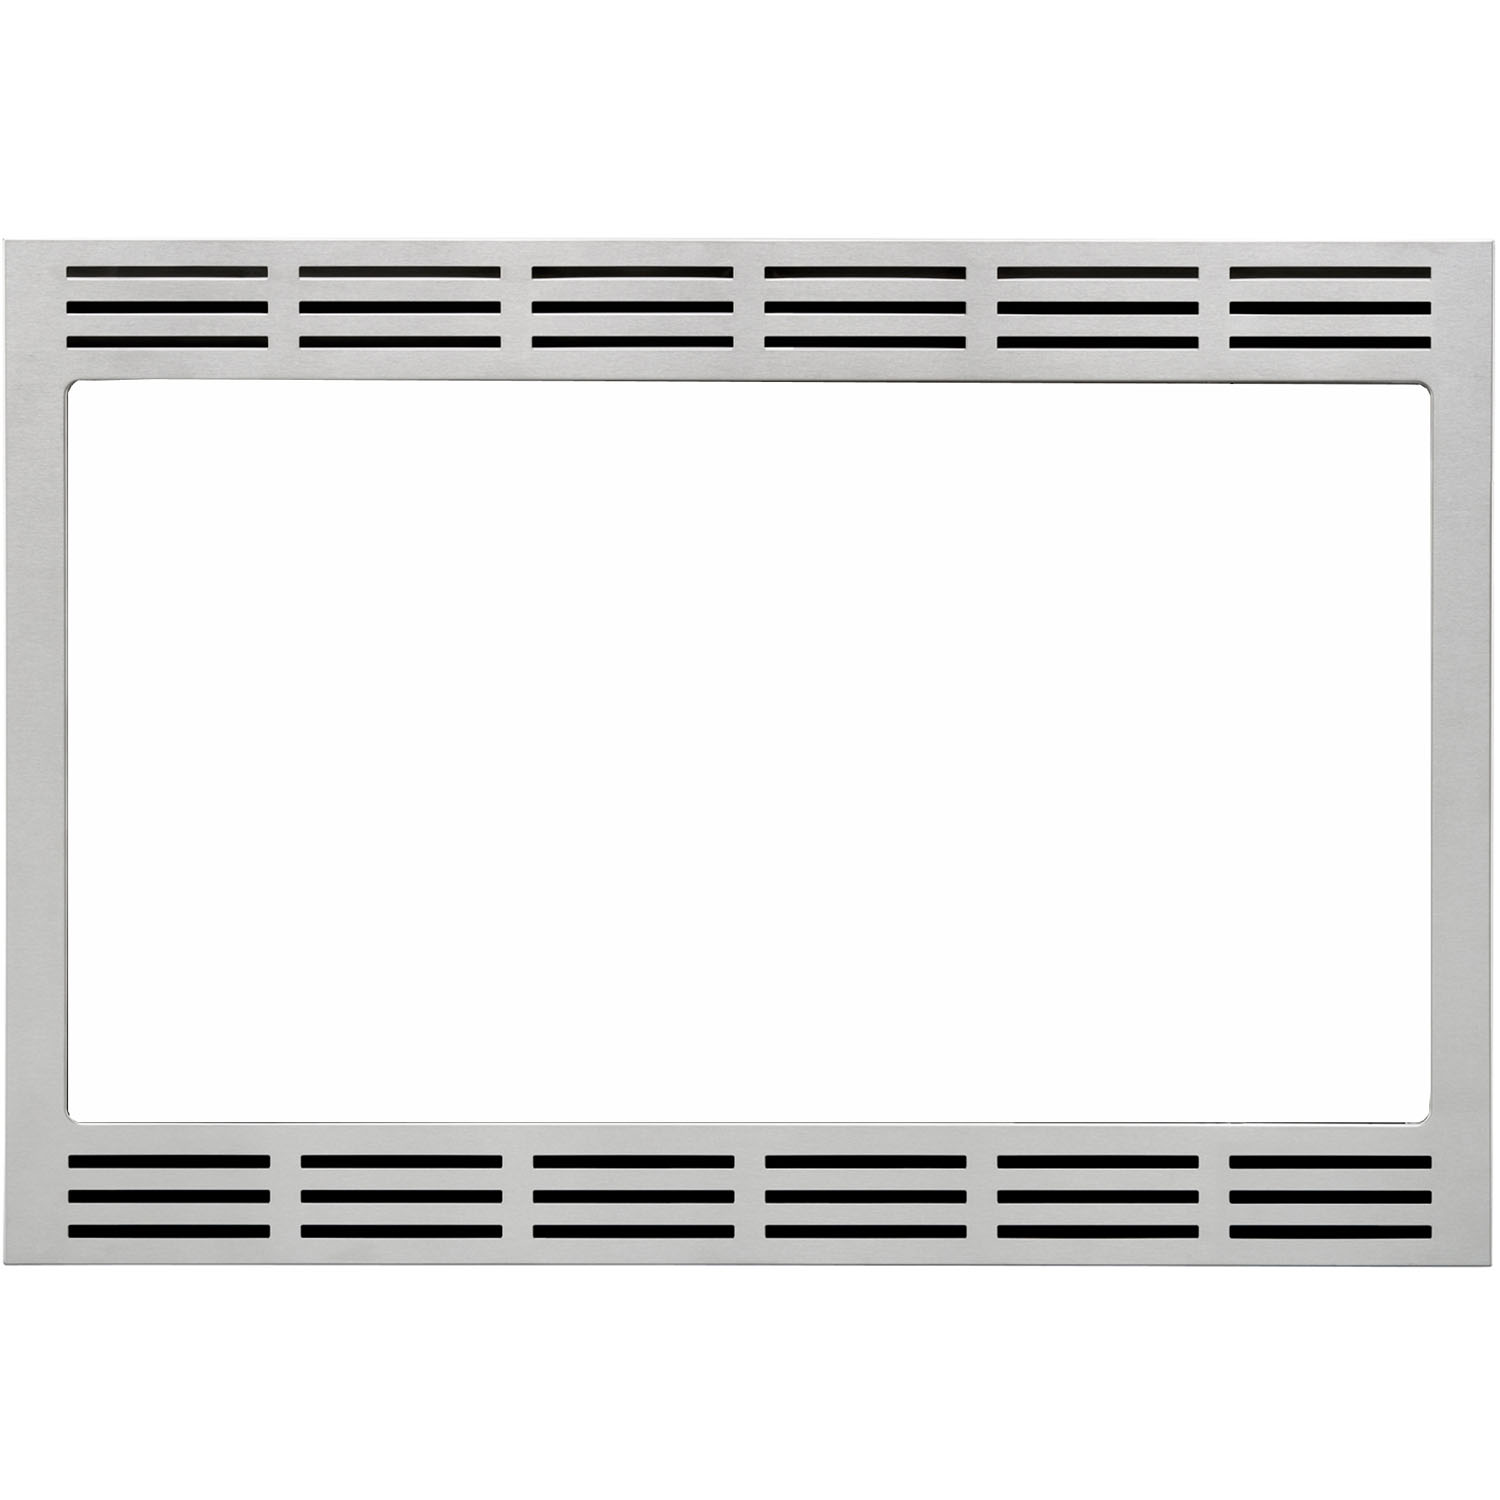 27" Trim Kit for 2.2 cuft Stainless Microwave Ovens, NN-TK922SS